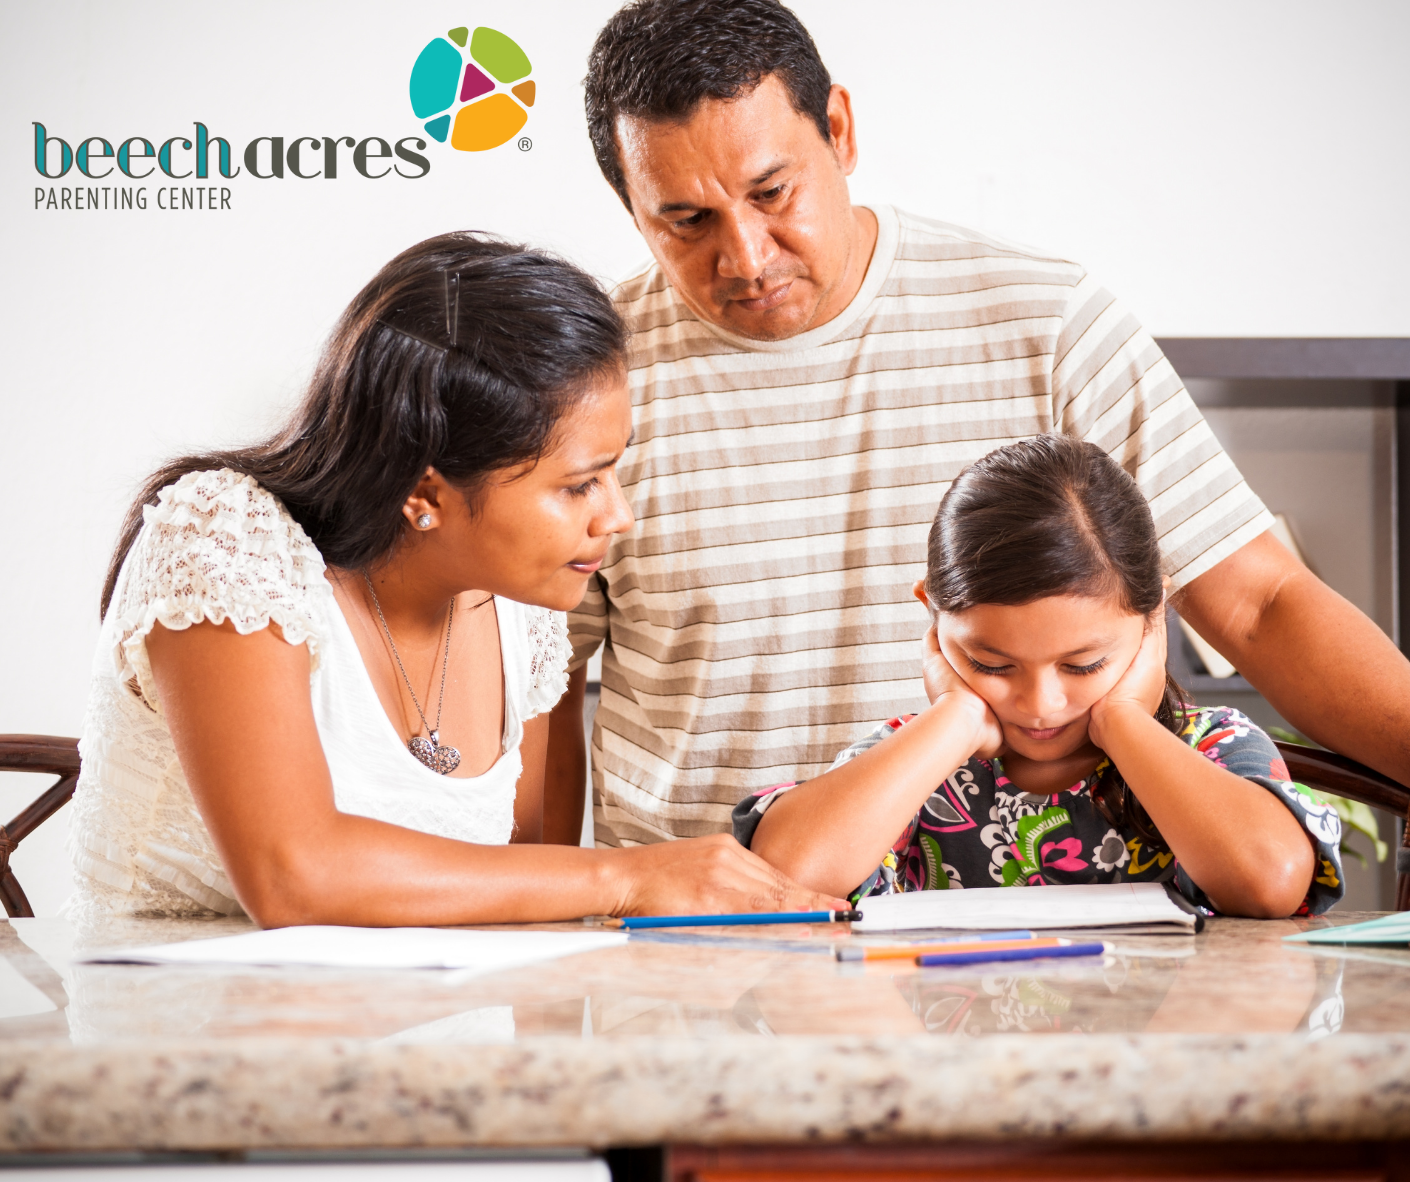 Help Your Family Manage The Homework Blues